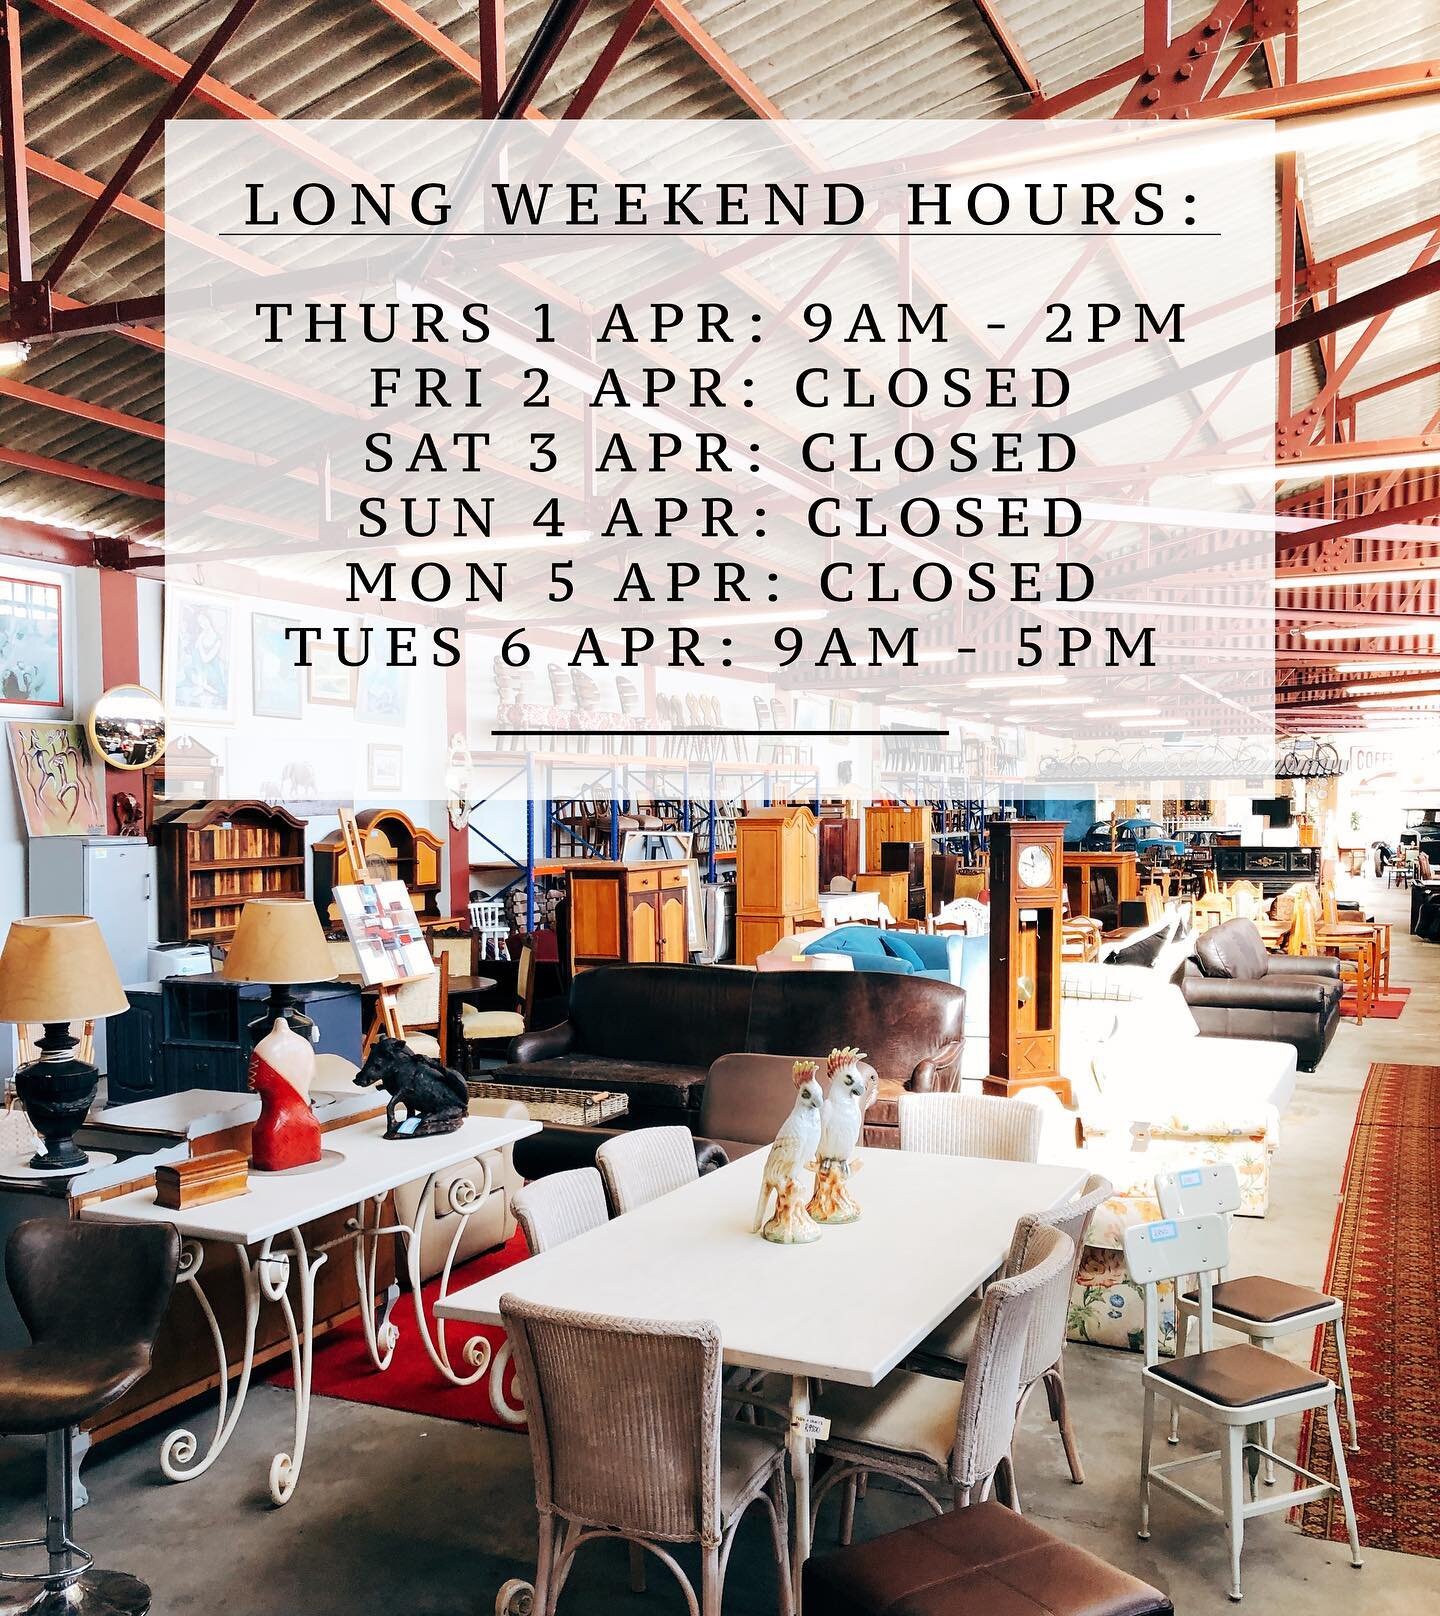 Please take note of our special operating hours this week as we&rsquo;ll be closed for the long weekend, returning back to normal hours on Tues 6 April.

However, we&rsquo;re getting a ton of new stock in on Tuesday, so try to pop in before the holid